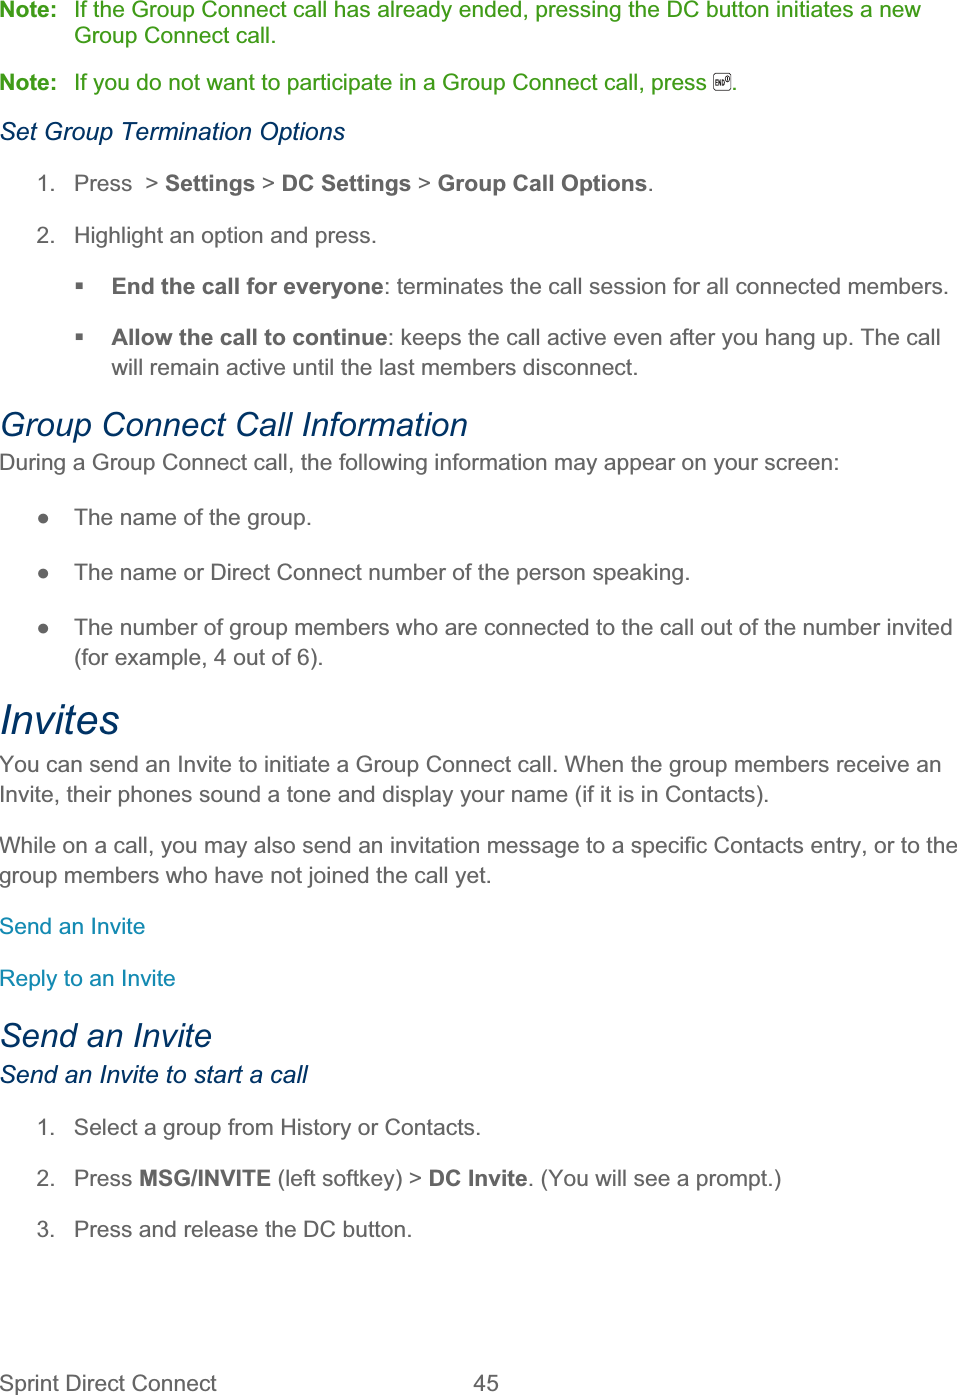 Sprint Direct Connect  45   Note:  If the Group Connect call has already ended, pressing the DC button initiates a new Group Connect call. Note:  If you do not want to participate in a Group Connect call, press  .Set Group Termination Options 1.  Press  &gt; Settings &gt; DC Settings &gt;Group Call Options.2.  Highlight an option and press. End the call for everyone: terminates the call session for all connected members. Allow the call to continue: keeps the call active even after you hang up. The call will remain active until the last members disconnect. Group Connect Call Information During a Group Connect call, the following information may appear on your screen: ŏ  The name of the group. ŏ  The name or Direct Connect number of the person speaking. ŏ  The number of group members who are connected to the call out of the number invited (for example, 4 out of 6). InvitesYou can send an Invite to initiate a Group Connect call. When the group members receive an Invite, their phones sound a tone and display your name (if it is in Contacts). While on a call, you may also send an invitation message to a specific Contacts entry, or to the group members who have not joined the call yet. Send an Invite Reply to an Invite Send an Invite Send an Invite to start a call 1.  Select a group from History or Contacts. 2. Press MSG/INVITE (left softkey) &gt; DC Invite. (You will see a prompt.) 3.  Press and release the DC button. 